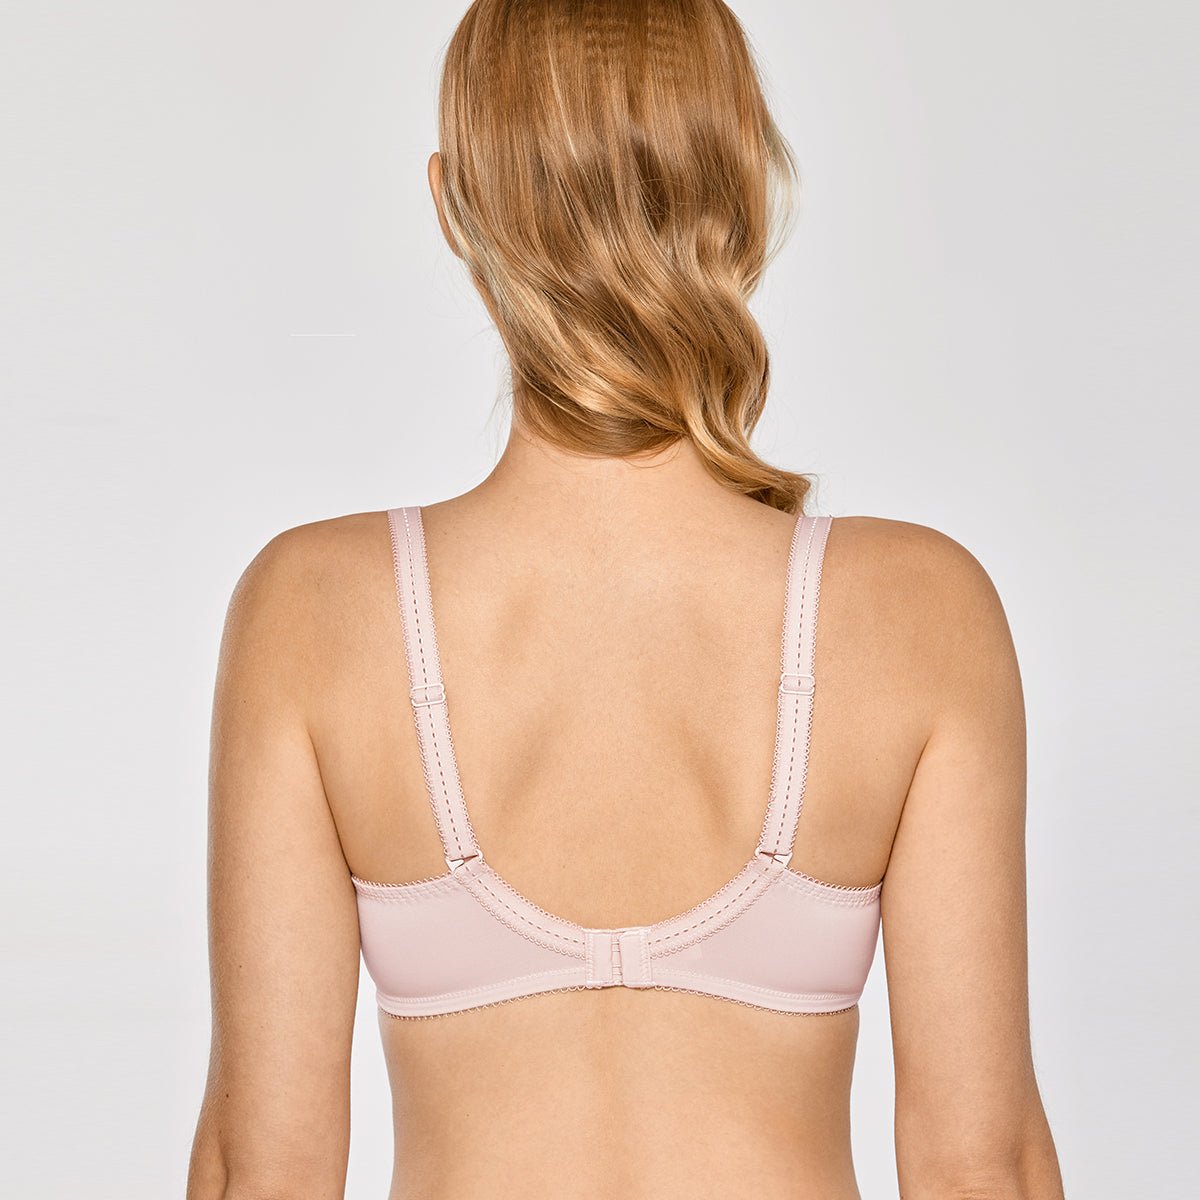 Whole Day Comfort Wireless Stretchy Pink Full Coverage Bra - 0cm